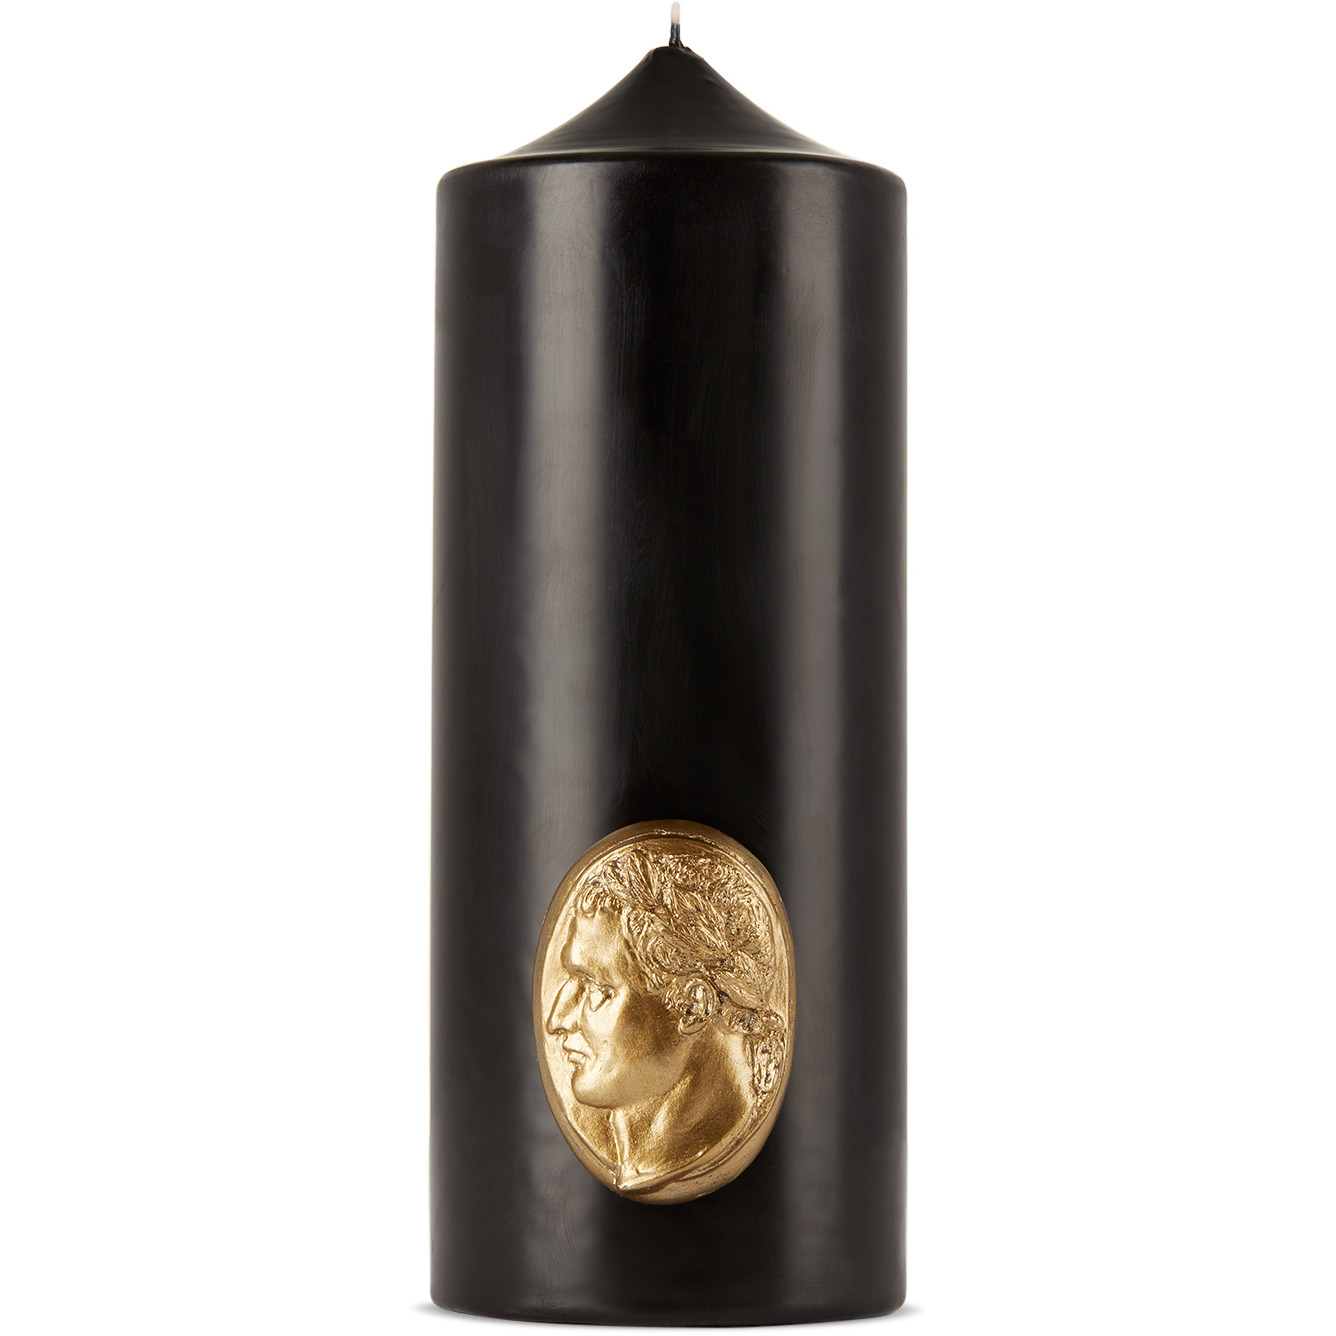 Trudon Imperial Pillar Candle